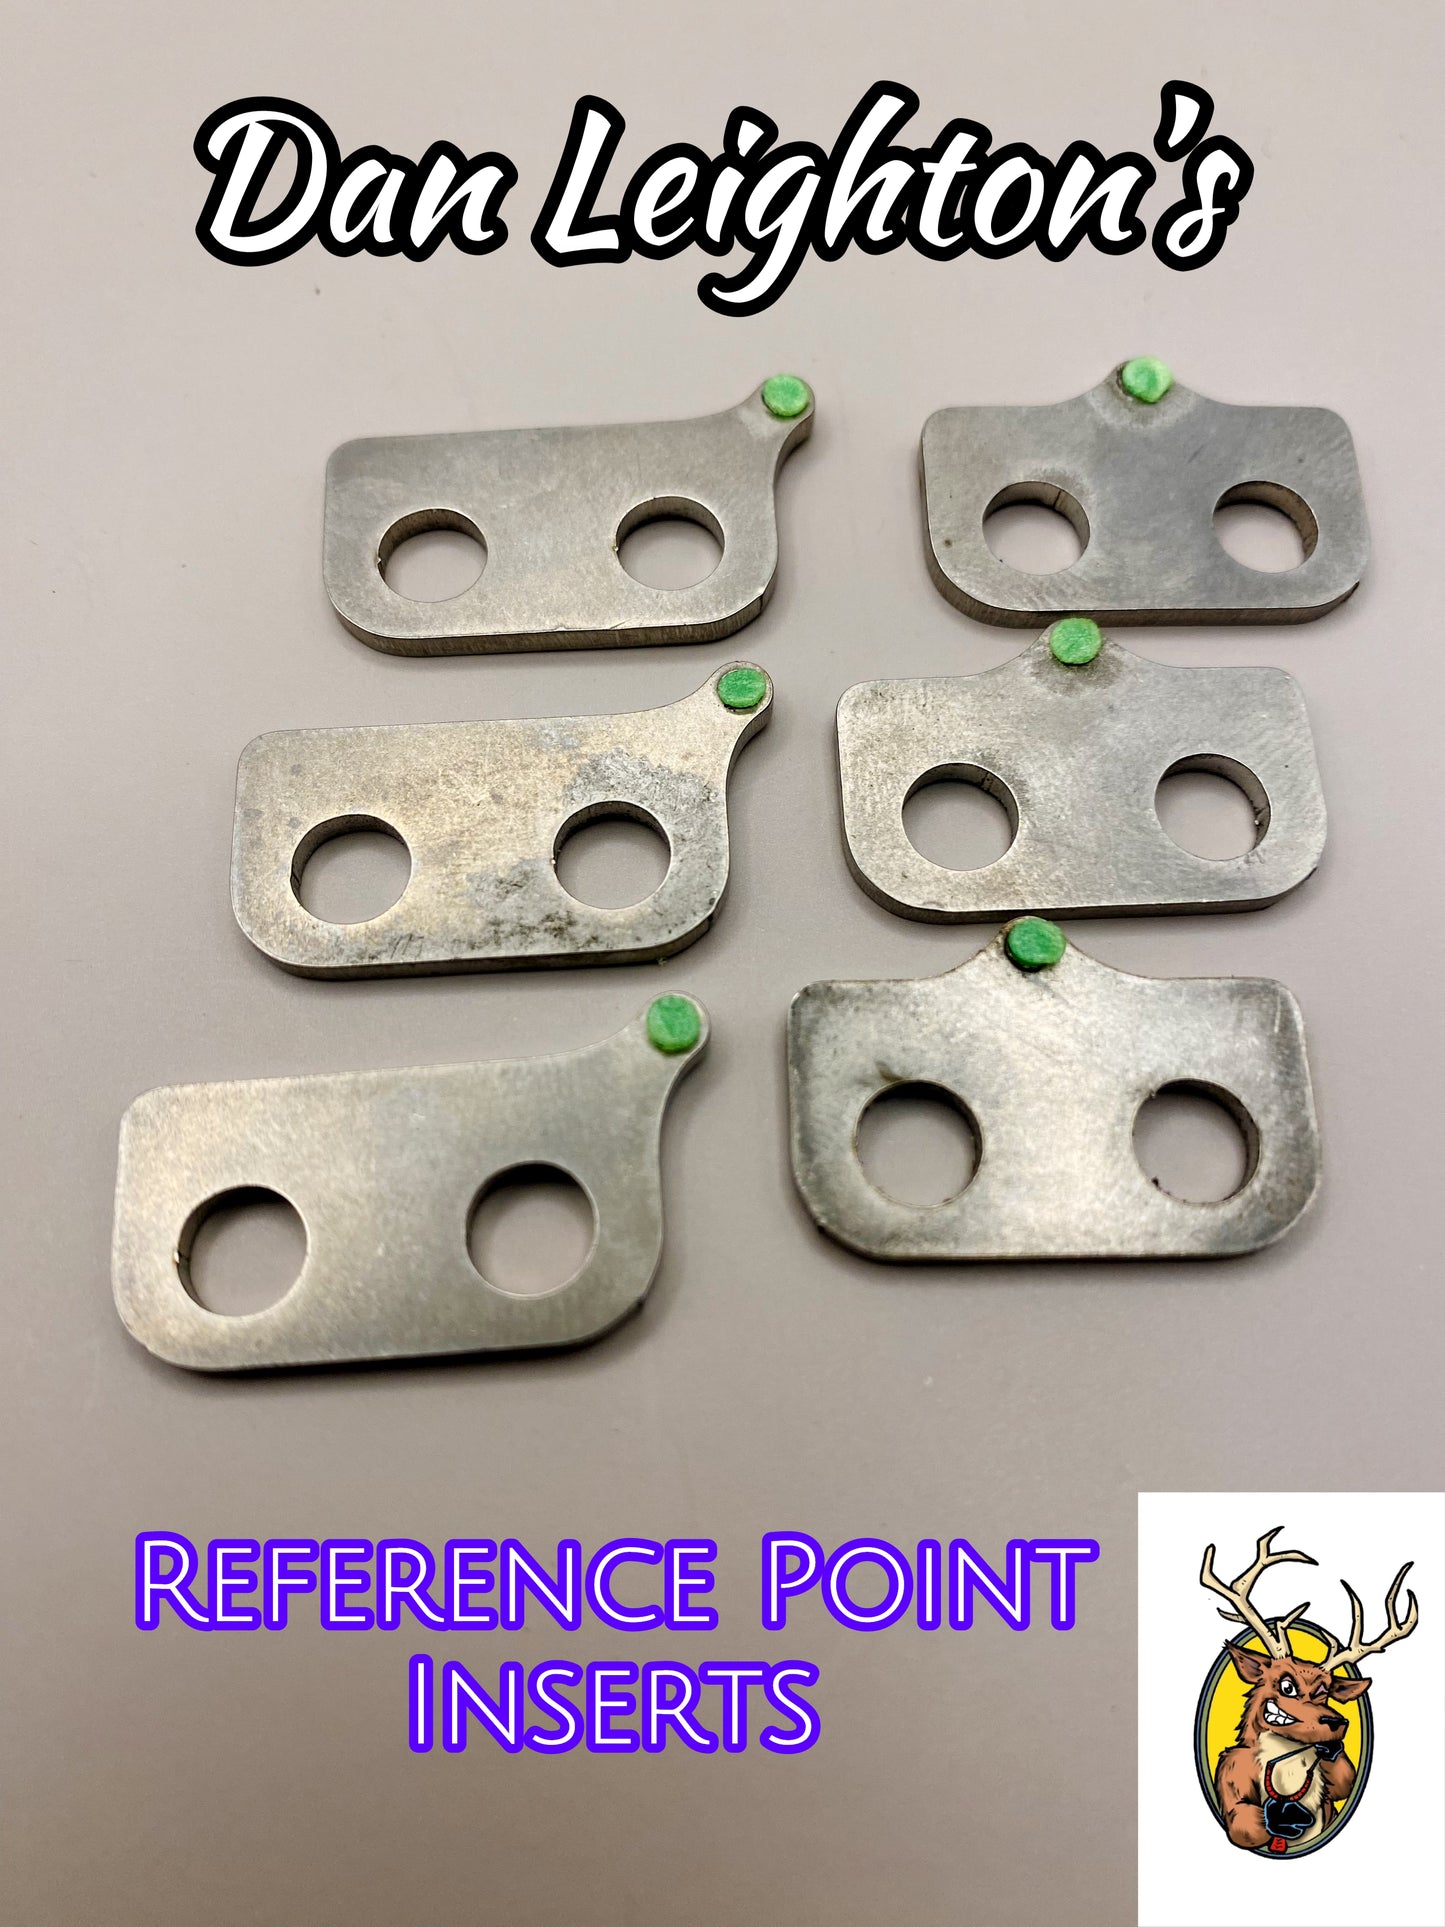 Reference Point Inserts for Dan Leighton’s Slingshots